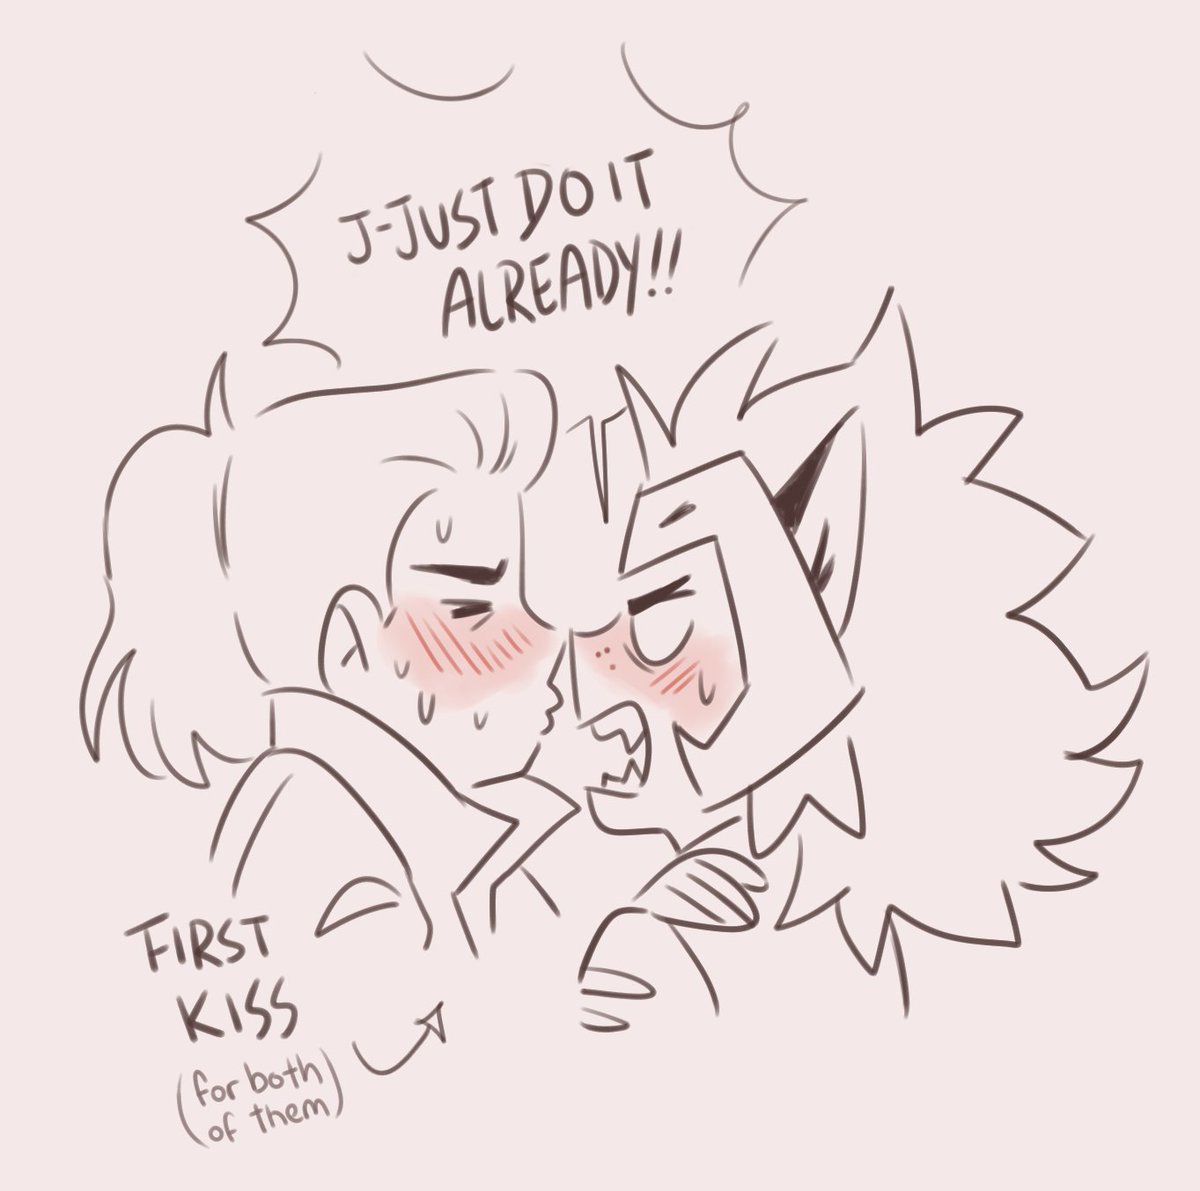 pre-kiss (they're a disaster): 